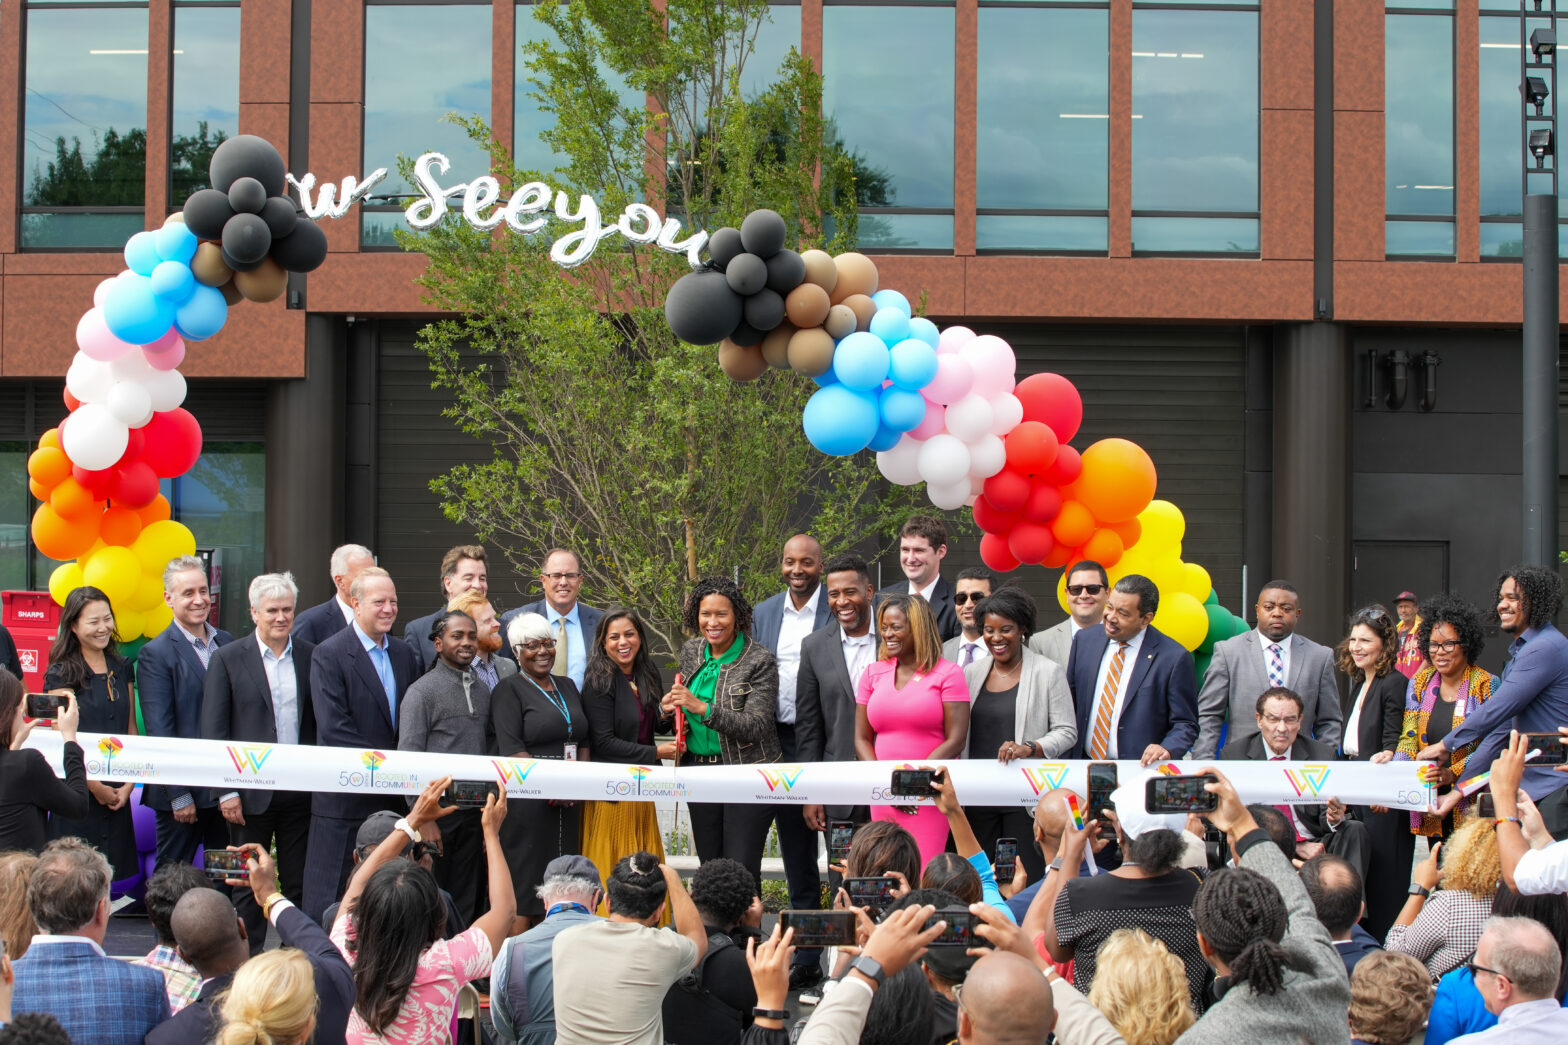 Group of dignitaries cut a ribbon onstage under a rainbow balloon arch with new medical building in background